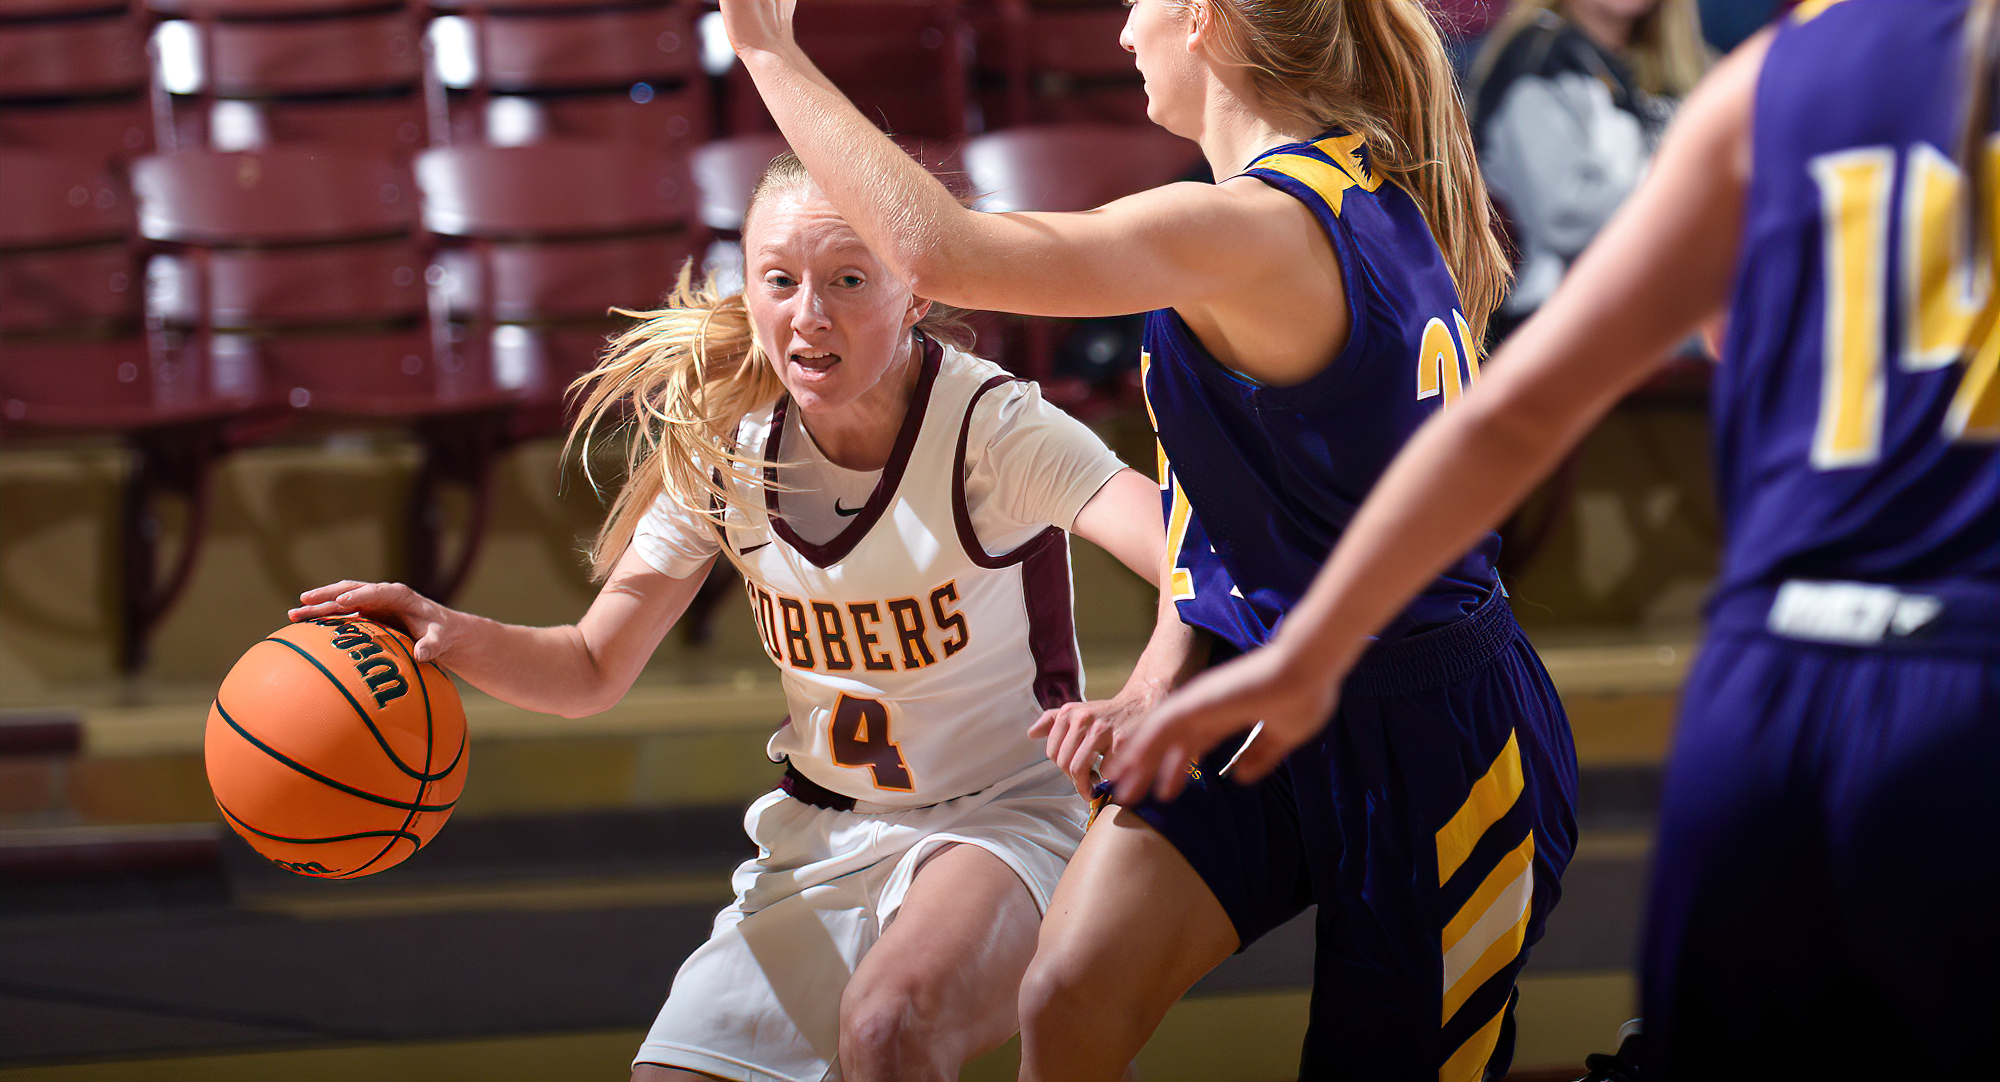 Sophomore guard Maddie Guler dribbles by a defender on her way to the basket in the Cobbers' 63-58 win over St. Catherine.